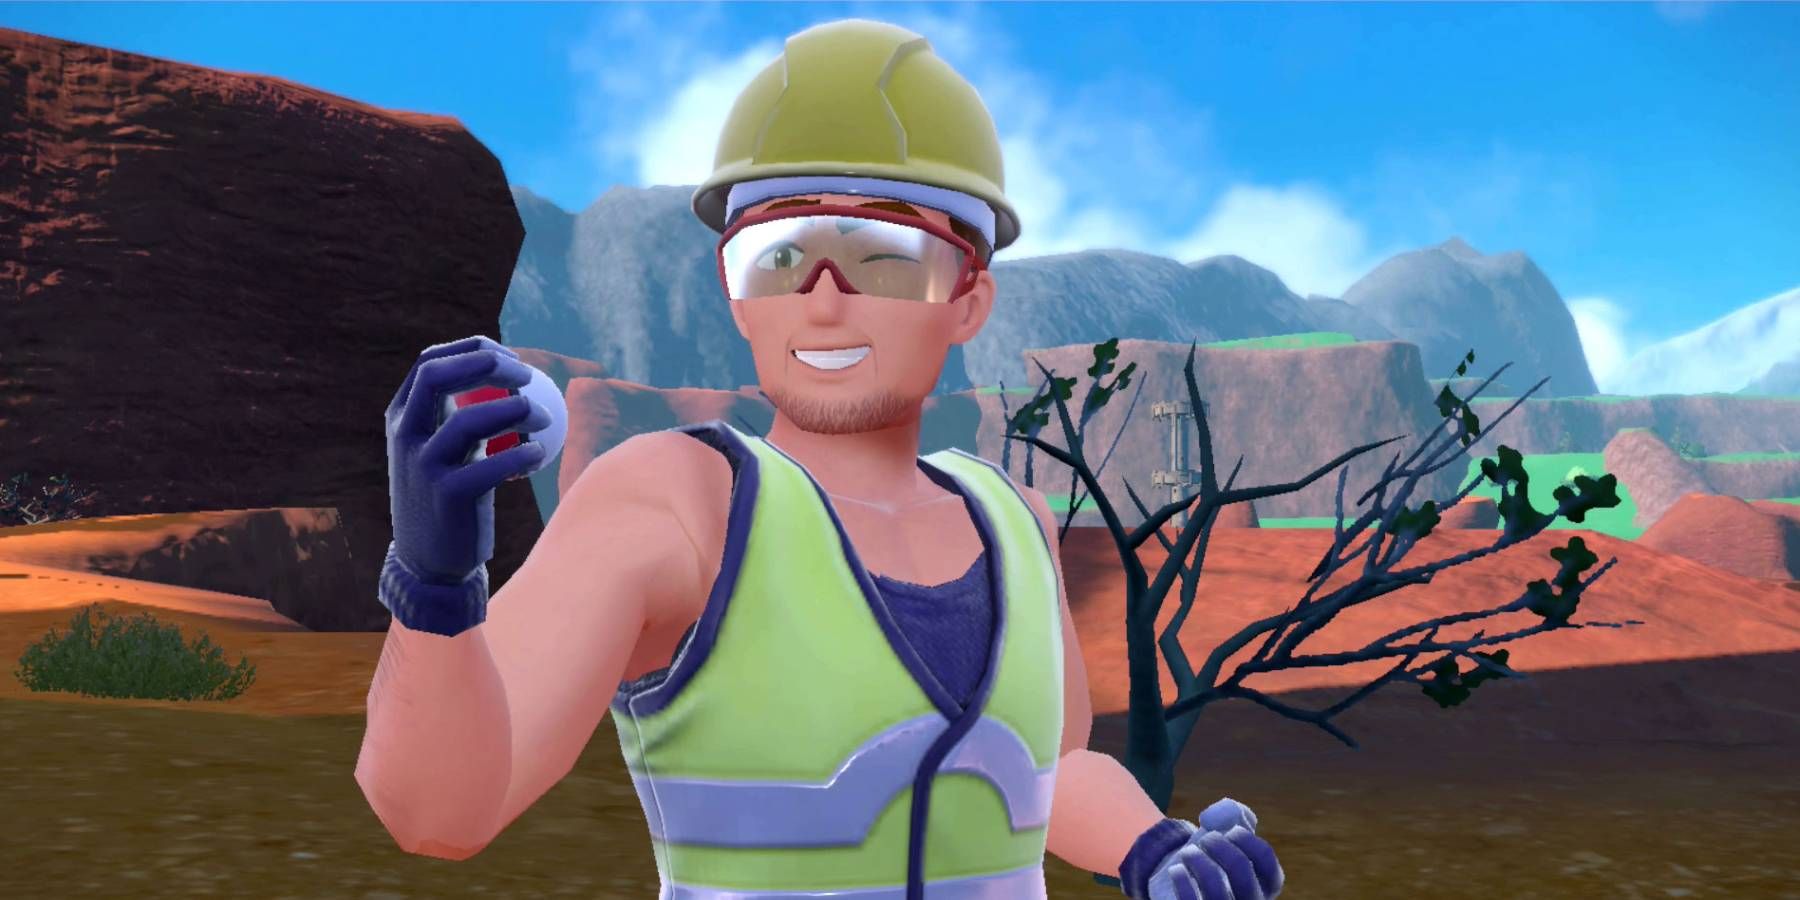 Construction worker trainer from Pokemon Scarlet and Violet